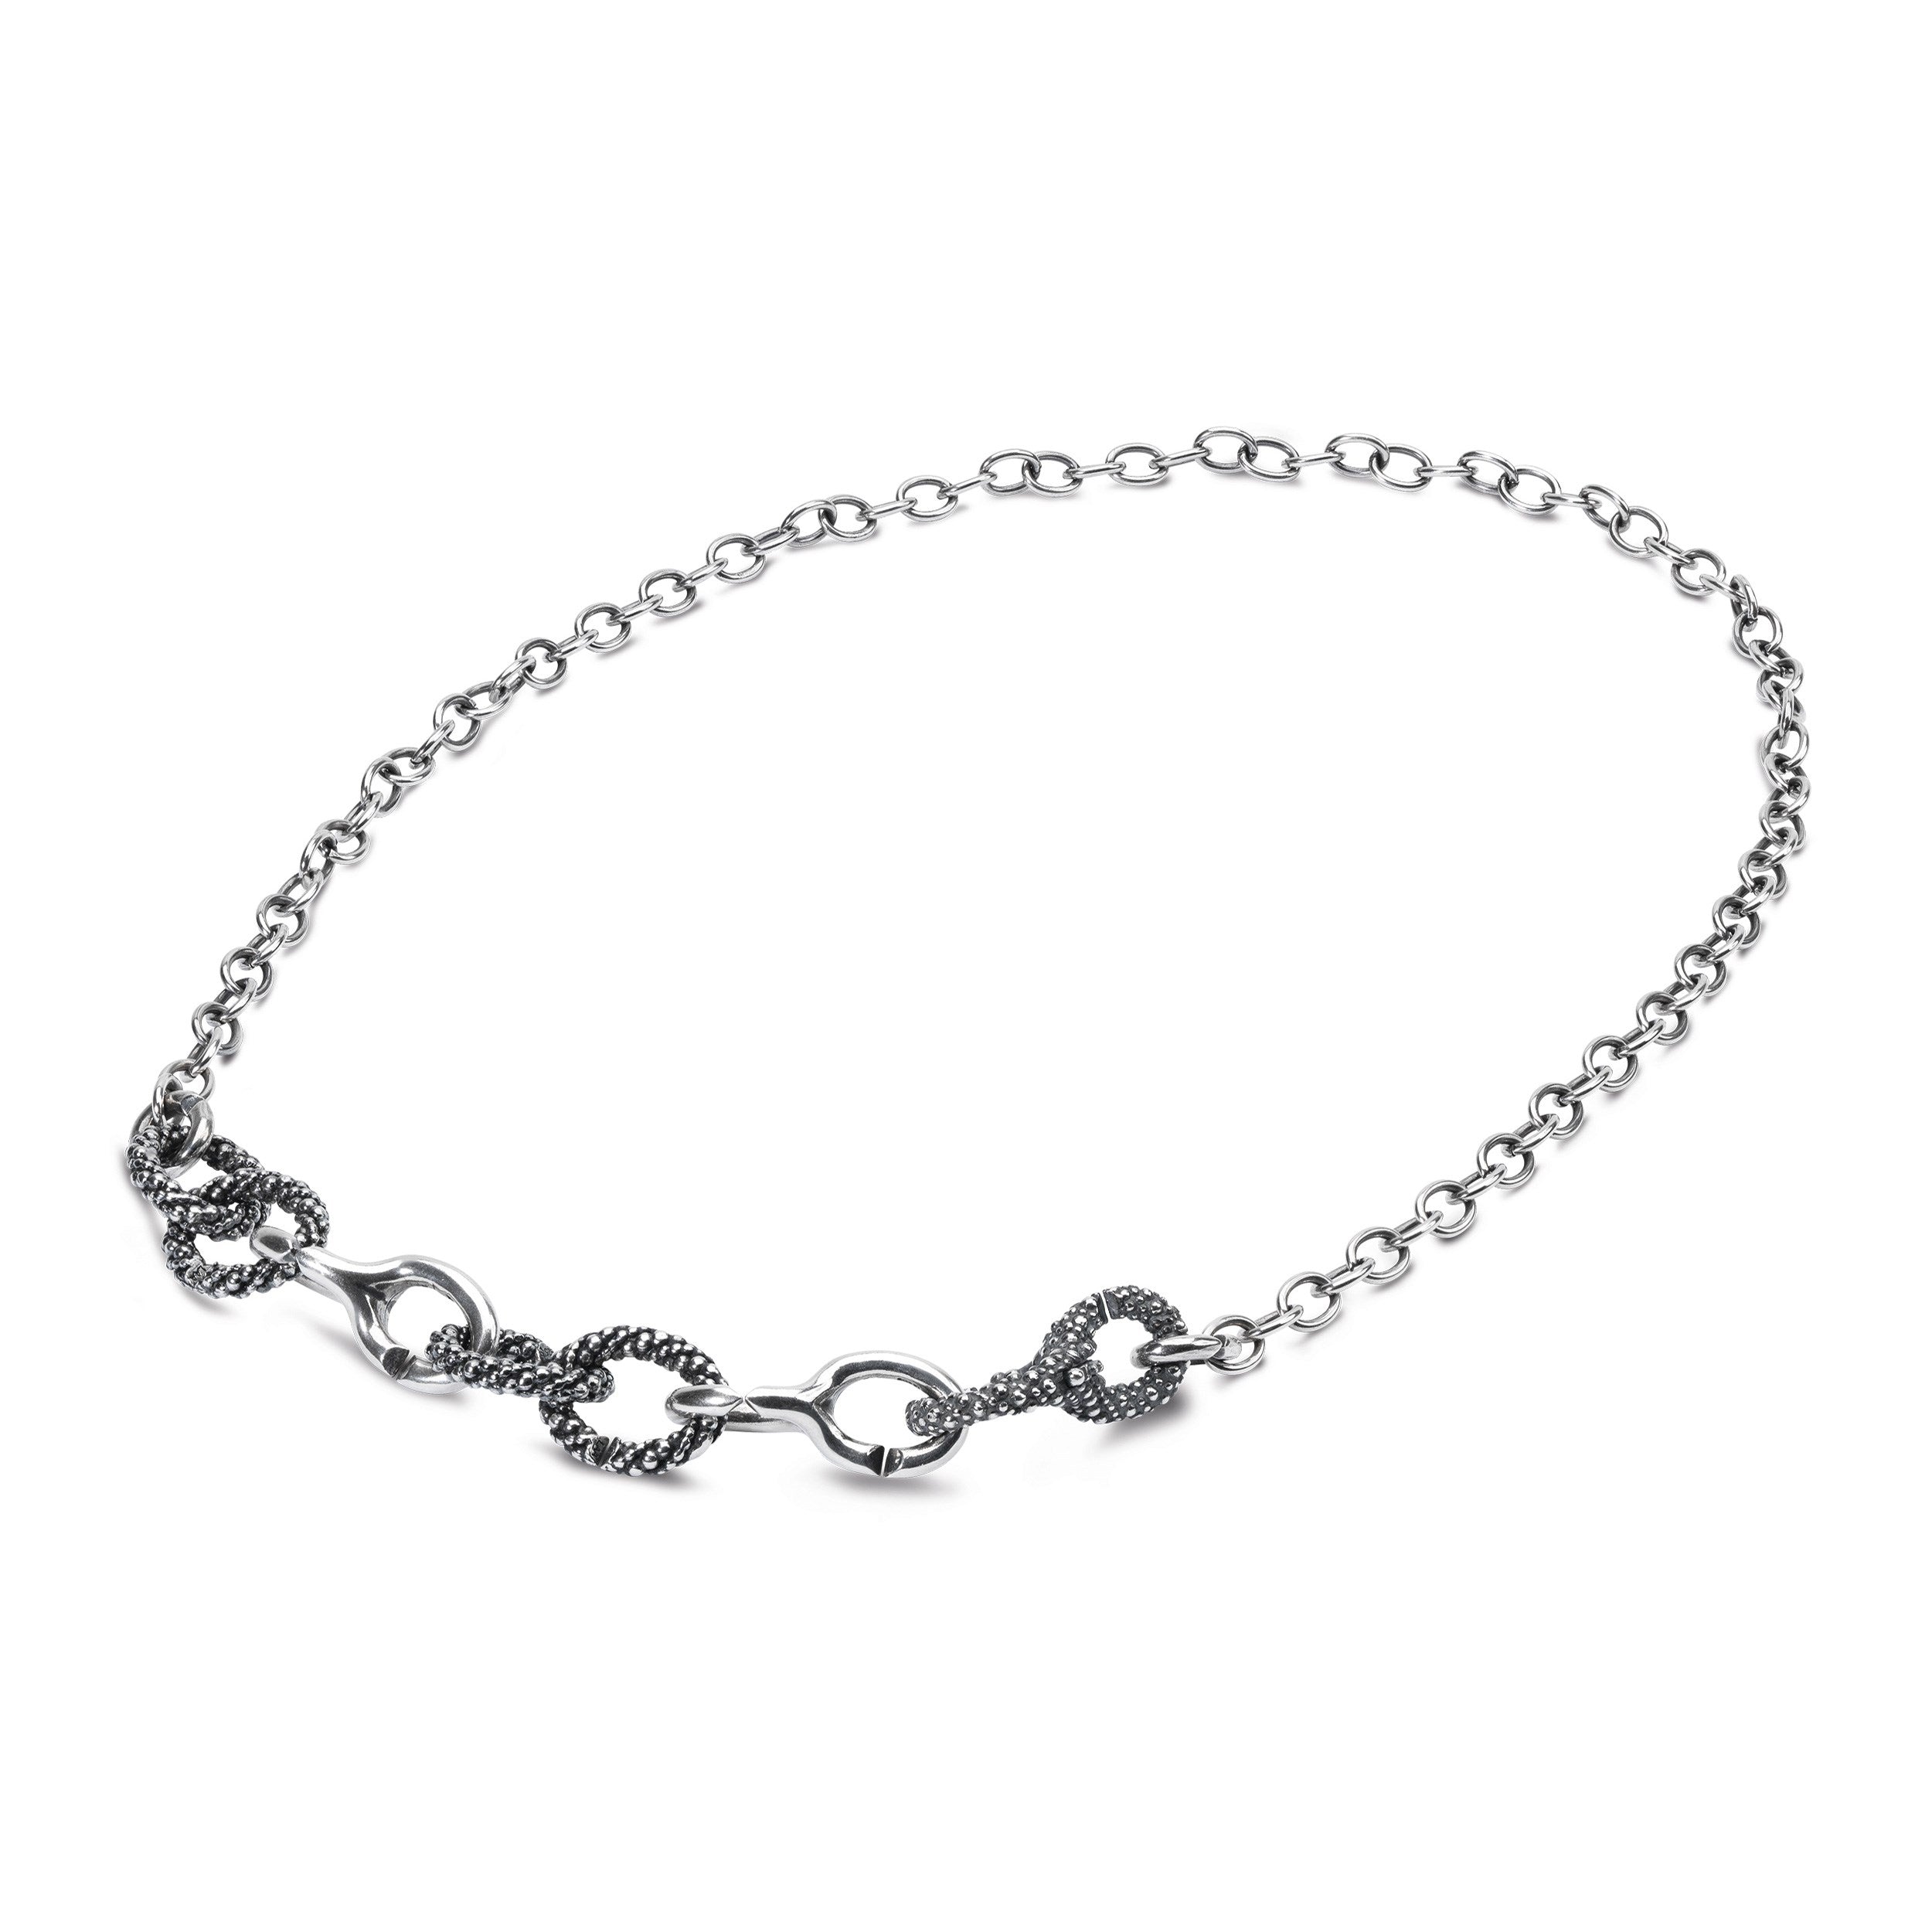 Be the Flash of Light Chain Necklace